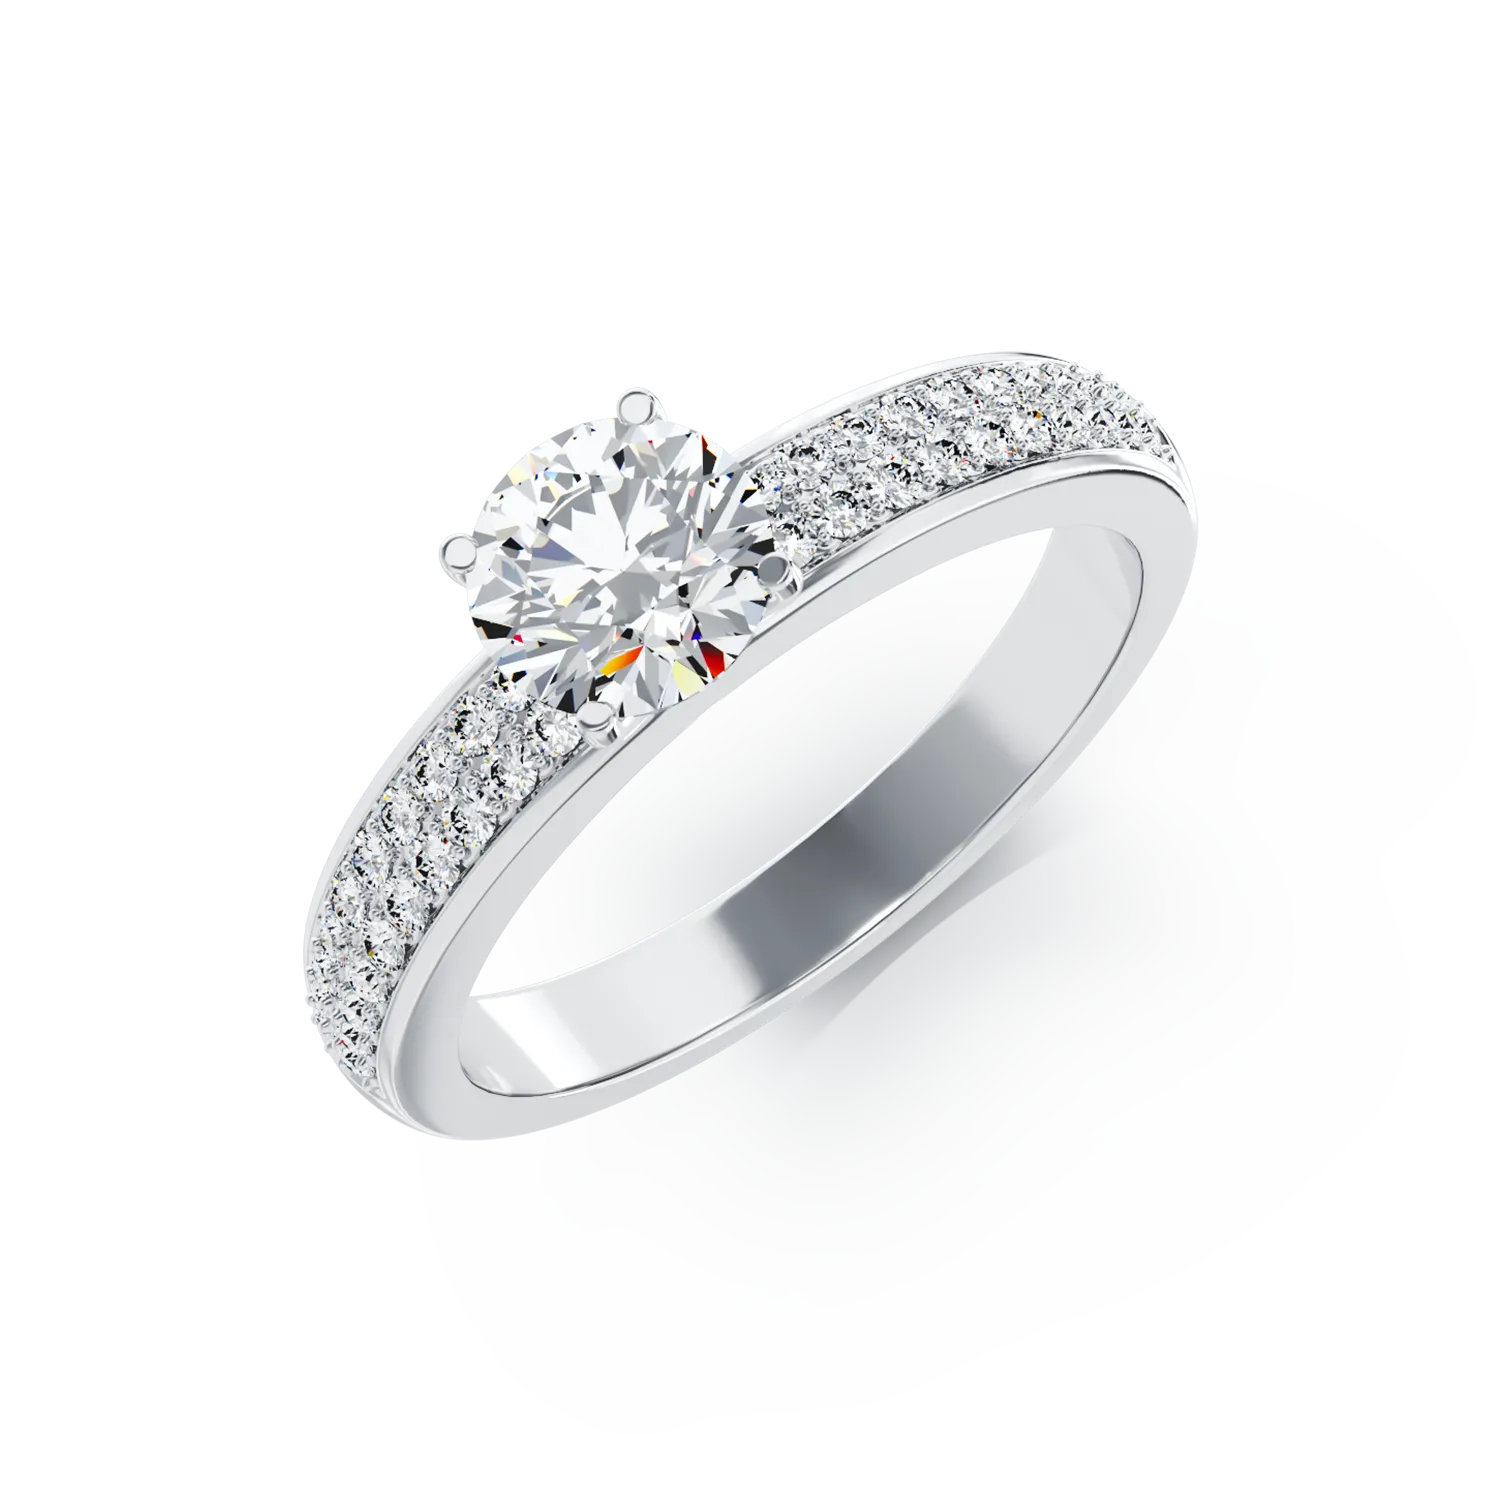 18K white gold engagement ring with 0.6ct diamond and 0.2ct diamonds